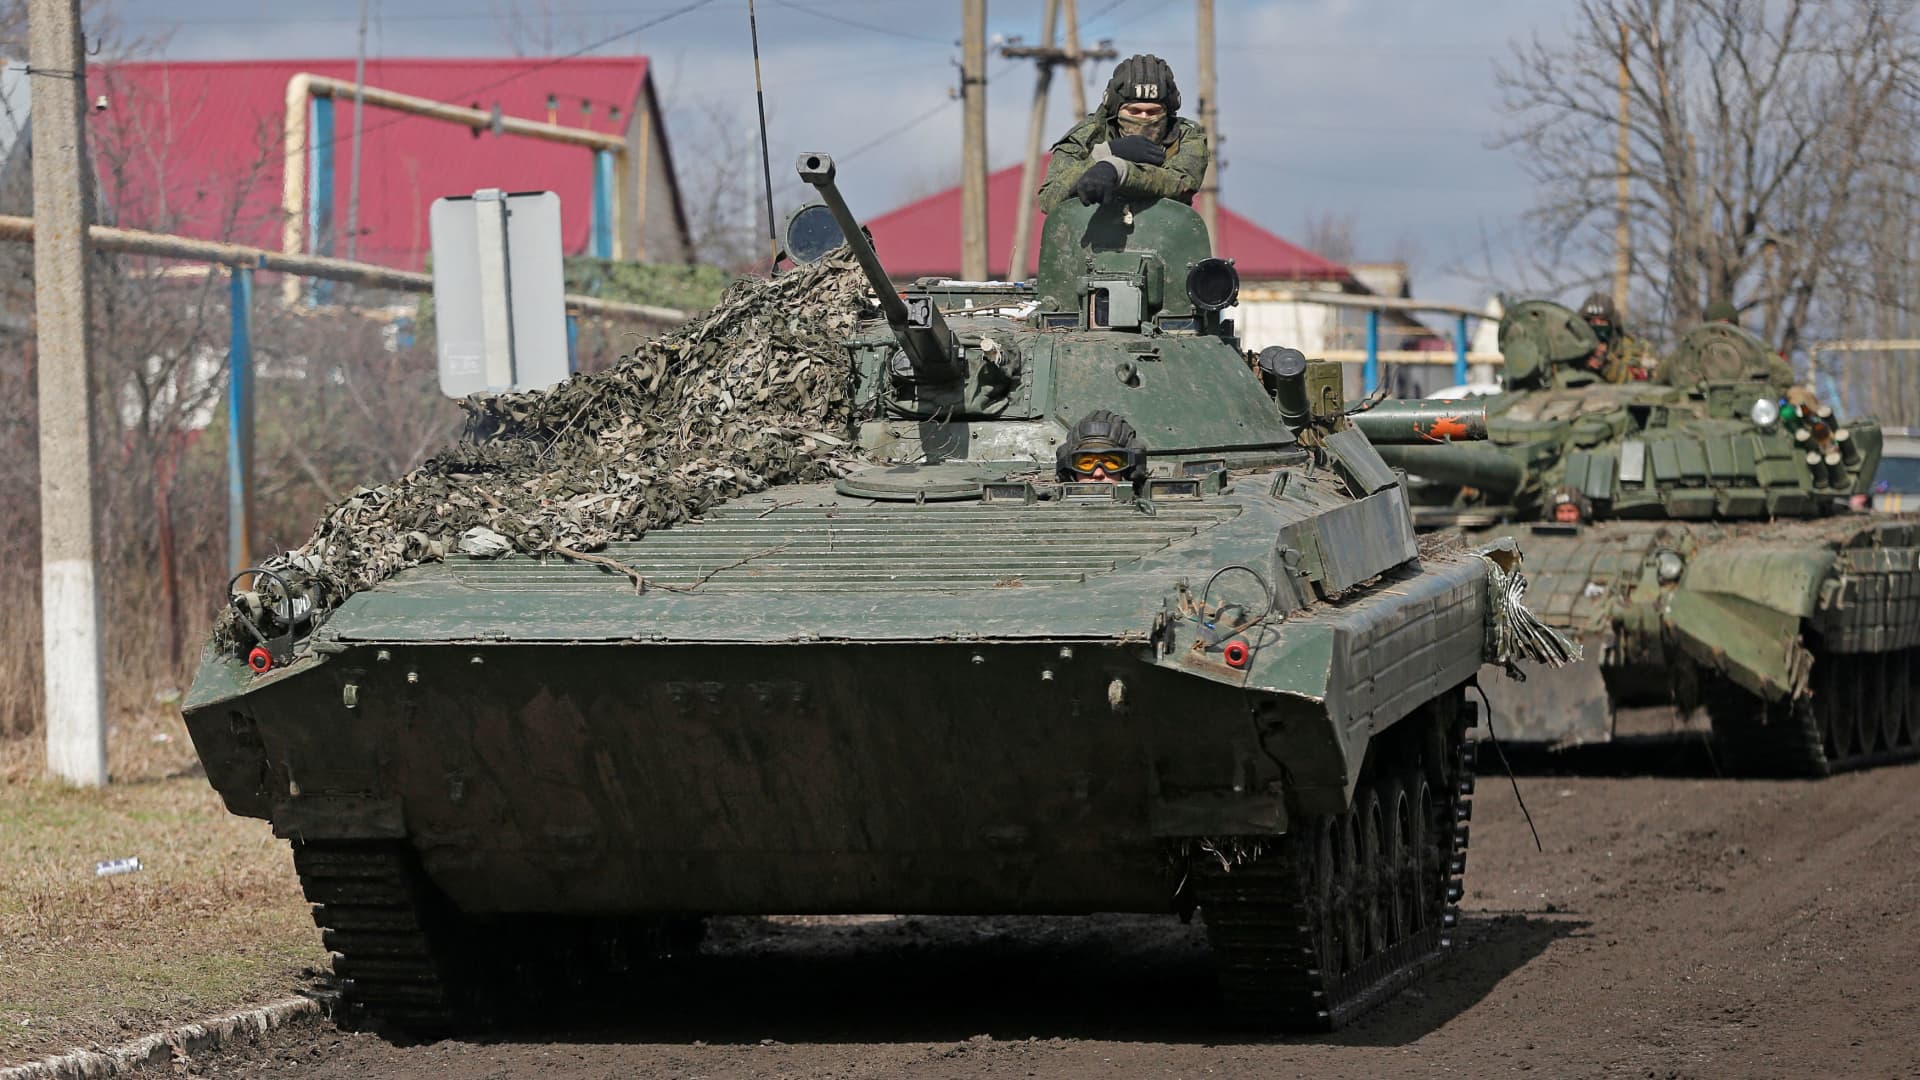 Service members of pro-Russian troops in uniforms without insignia drive an armoured vehicle in the separatist-controlled village of Bugas during Ukraine-Russia conflict in the Donetsk region, Ukraine March 6, 2022.